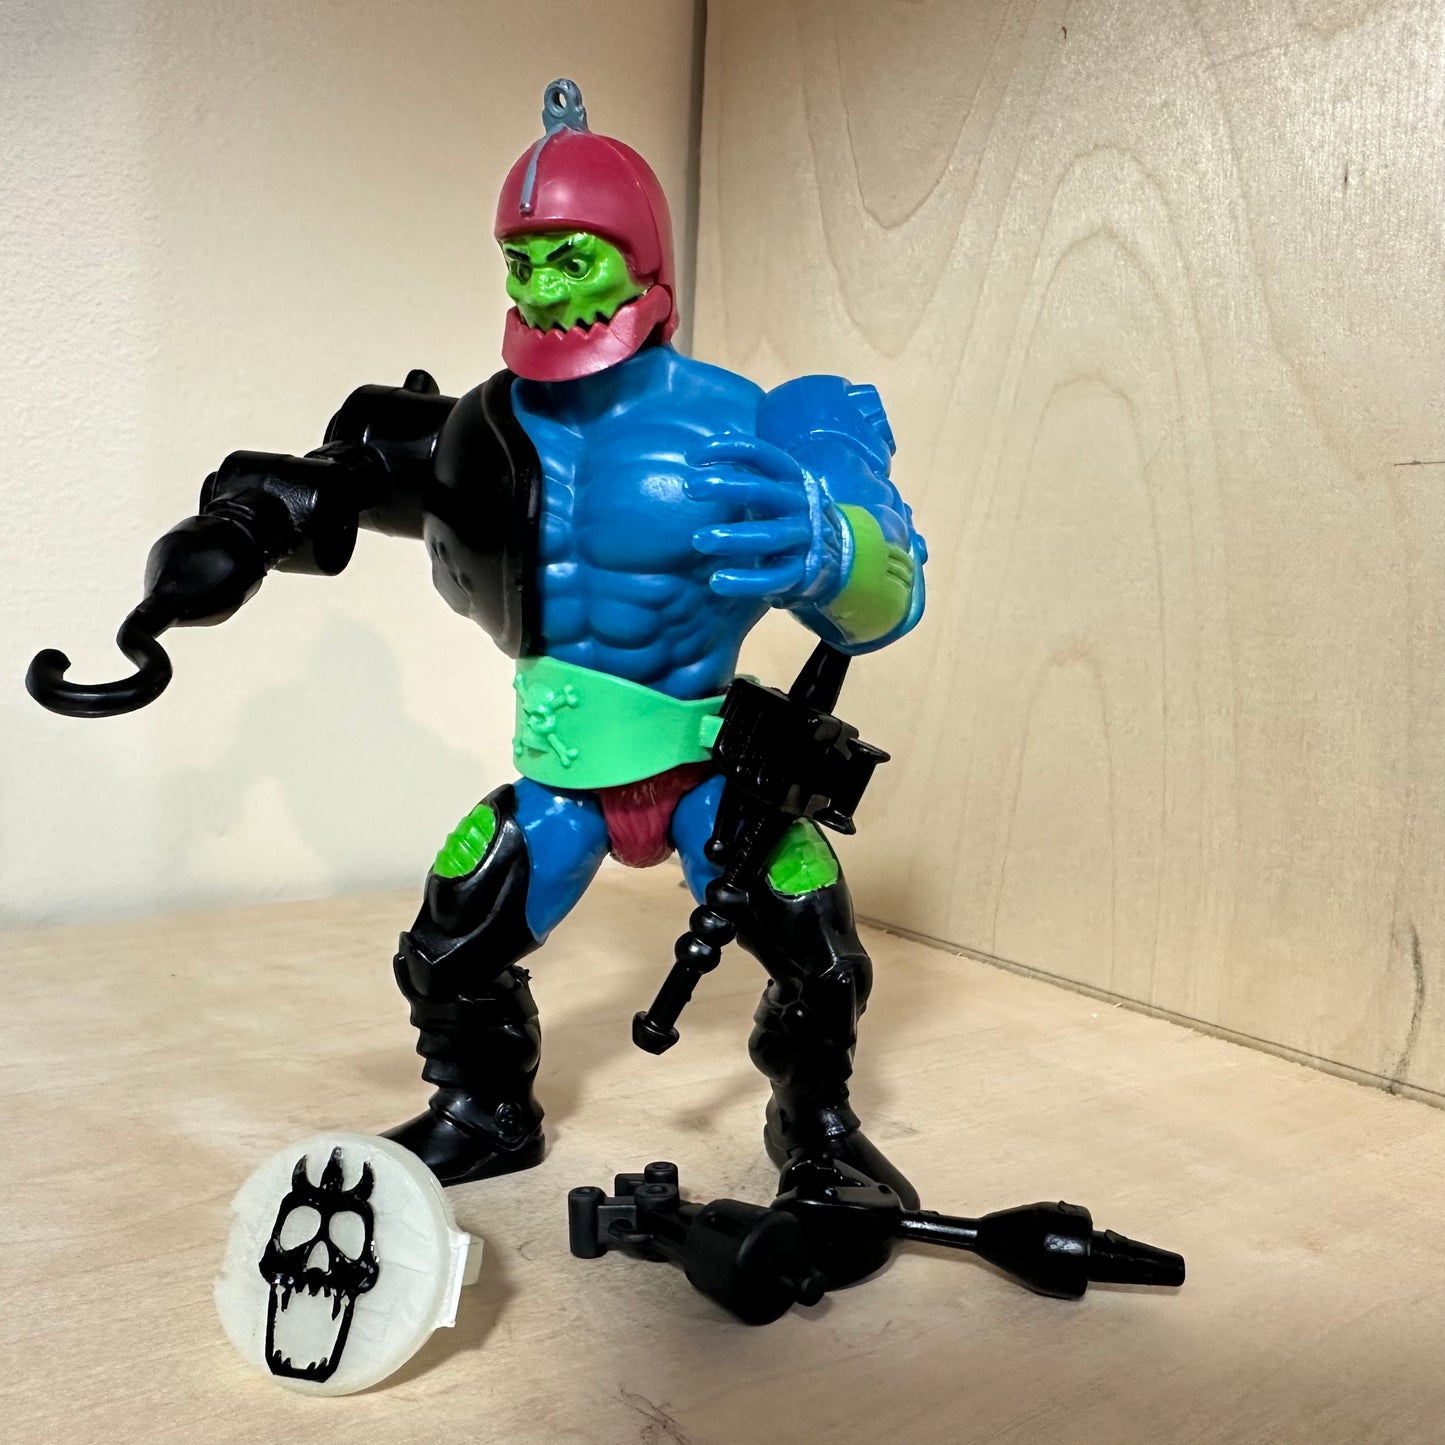 1981 MOTU Trapjaw Complete Vintage Master’s of the Universe Action Figure He-Man